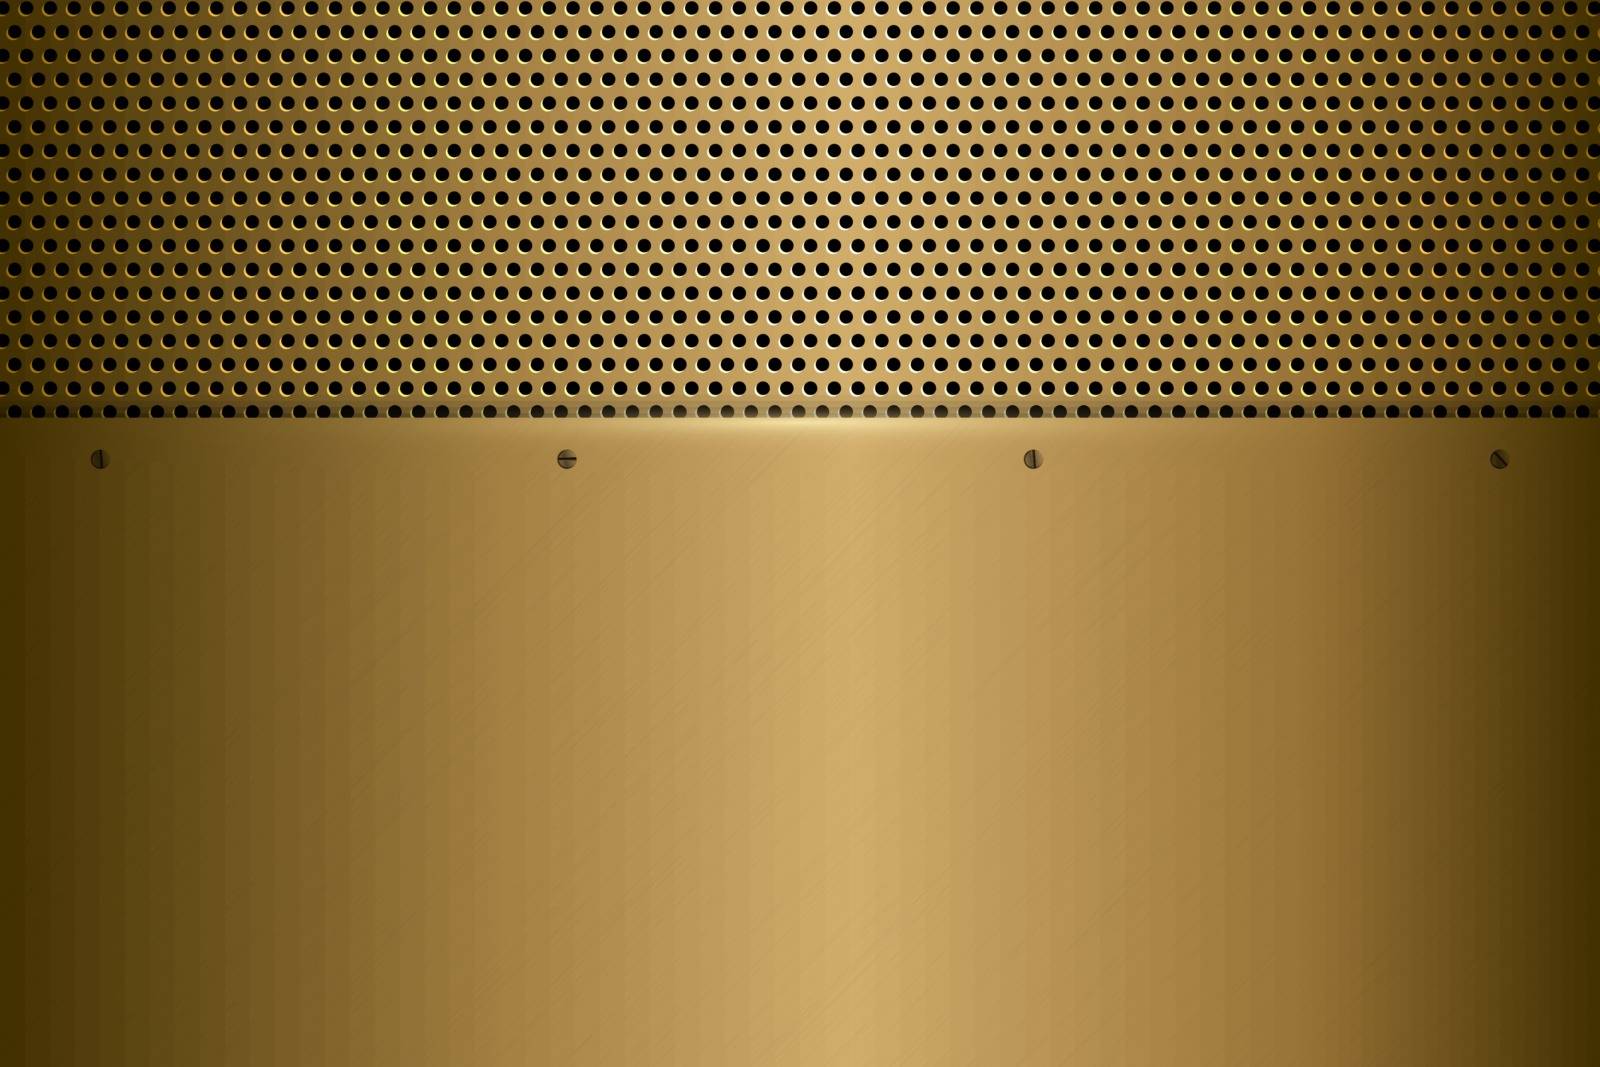 Metallic background.Luxury of gold with carbon fiber texture.Golden metal technology concept.